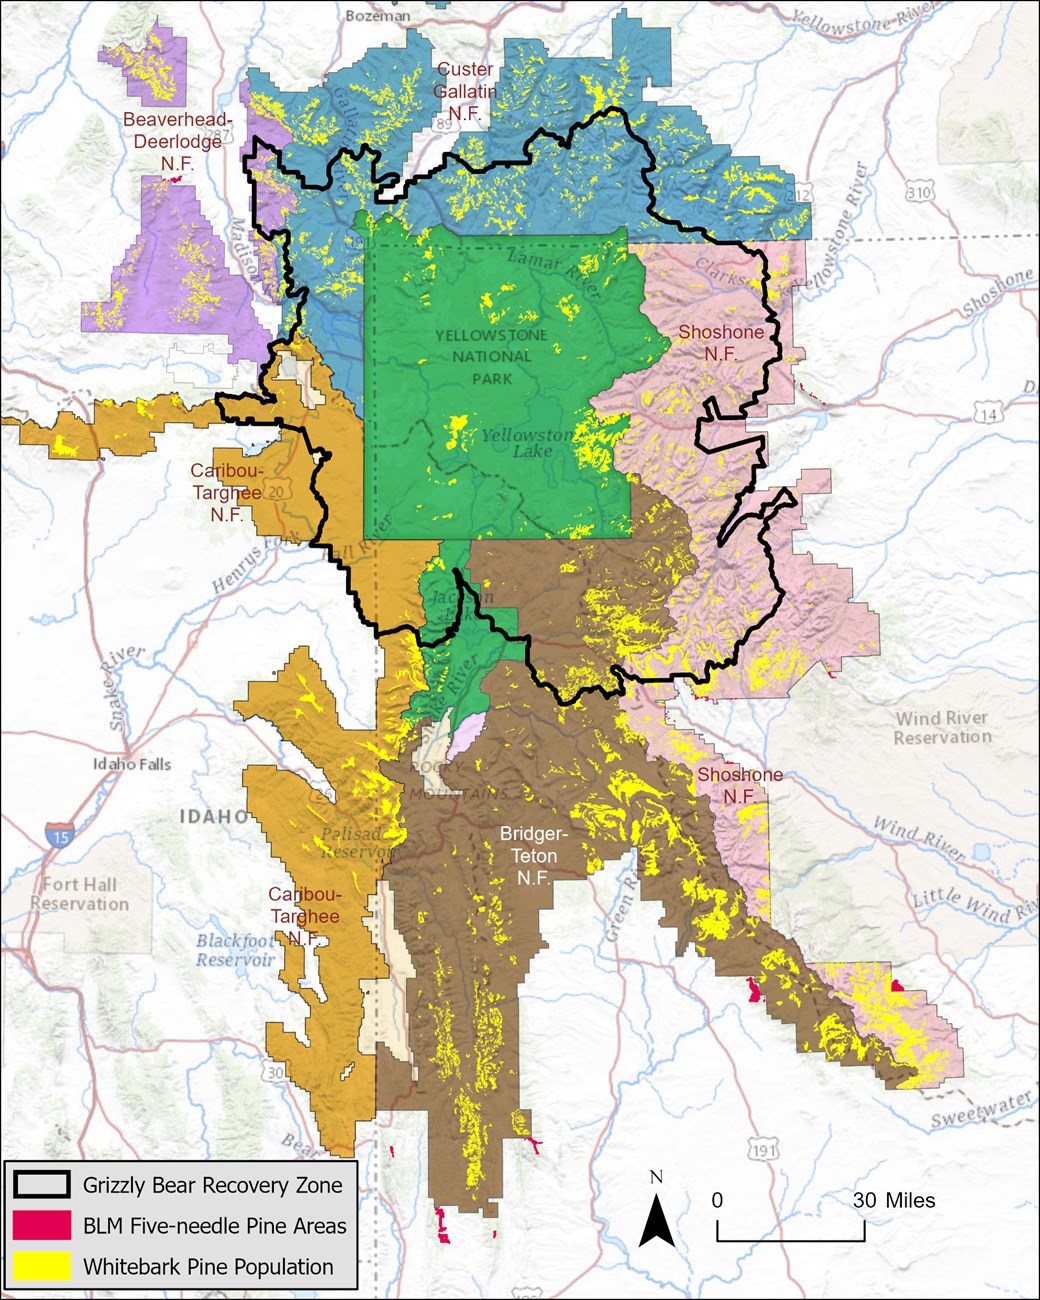 Map of the Greater Yellowstone Ecosystem, with agency boundaries and grizzly bear recovery zone.